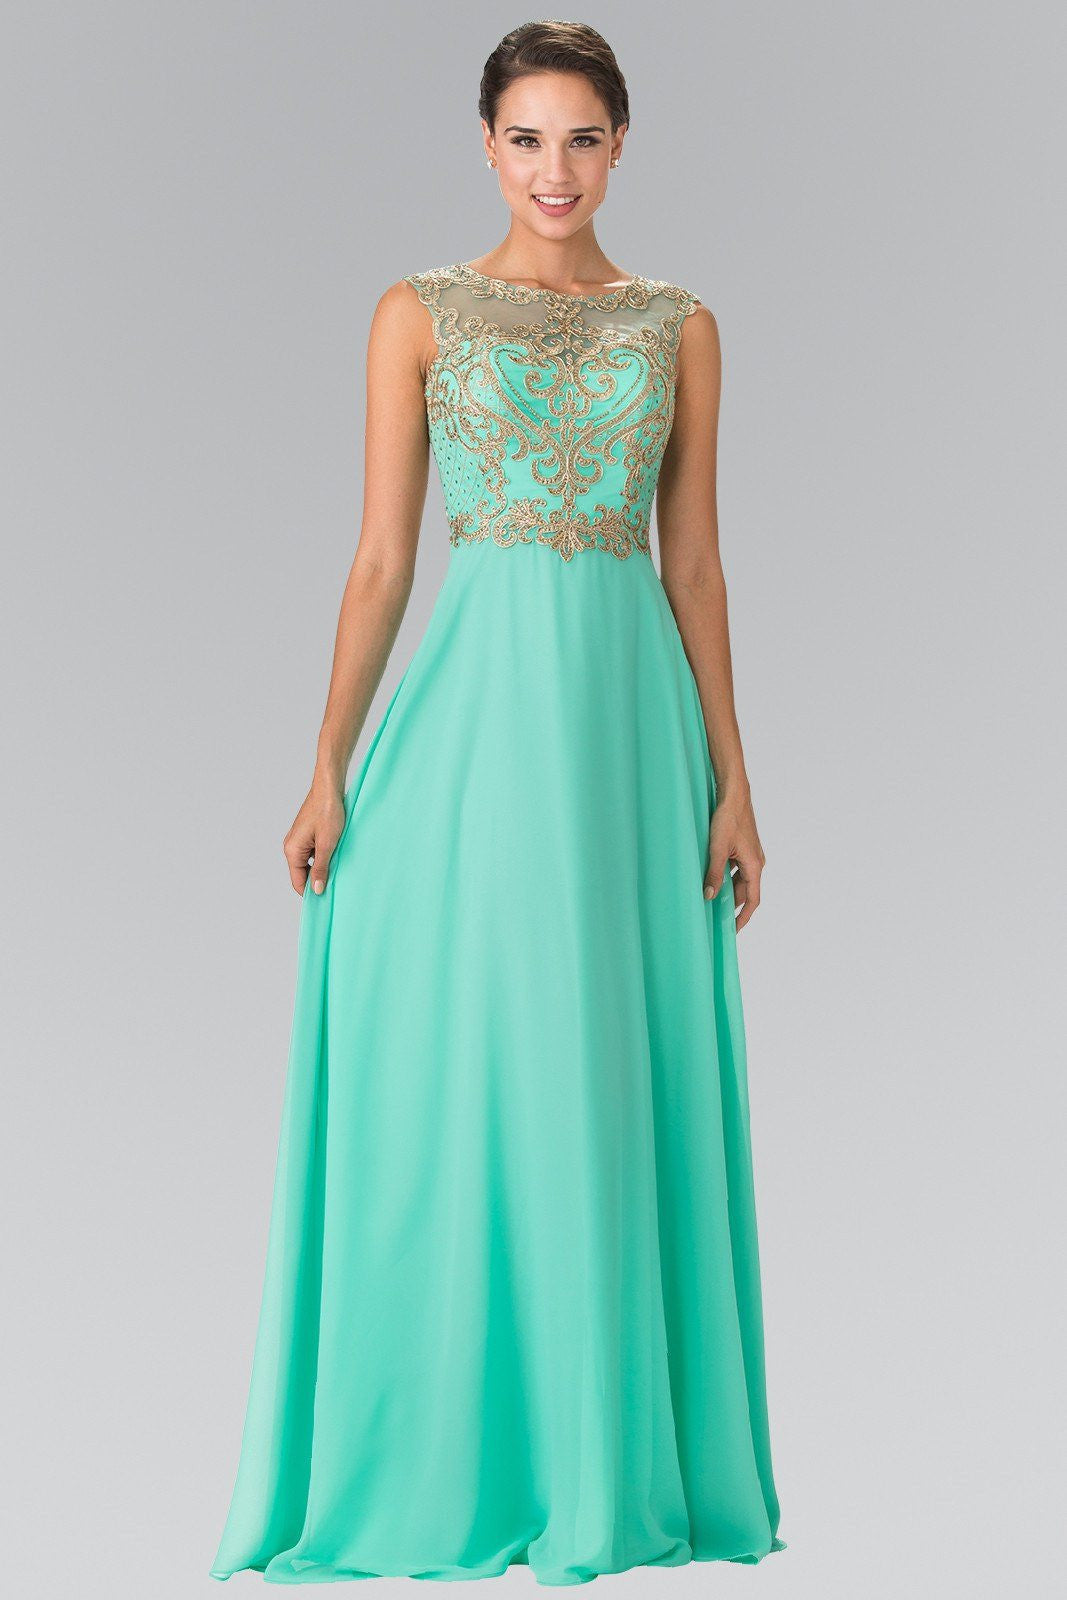 inexpensive formal evening gowns